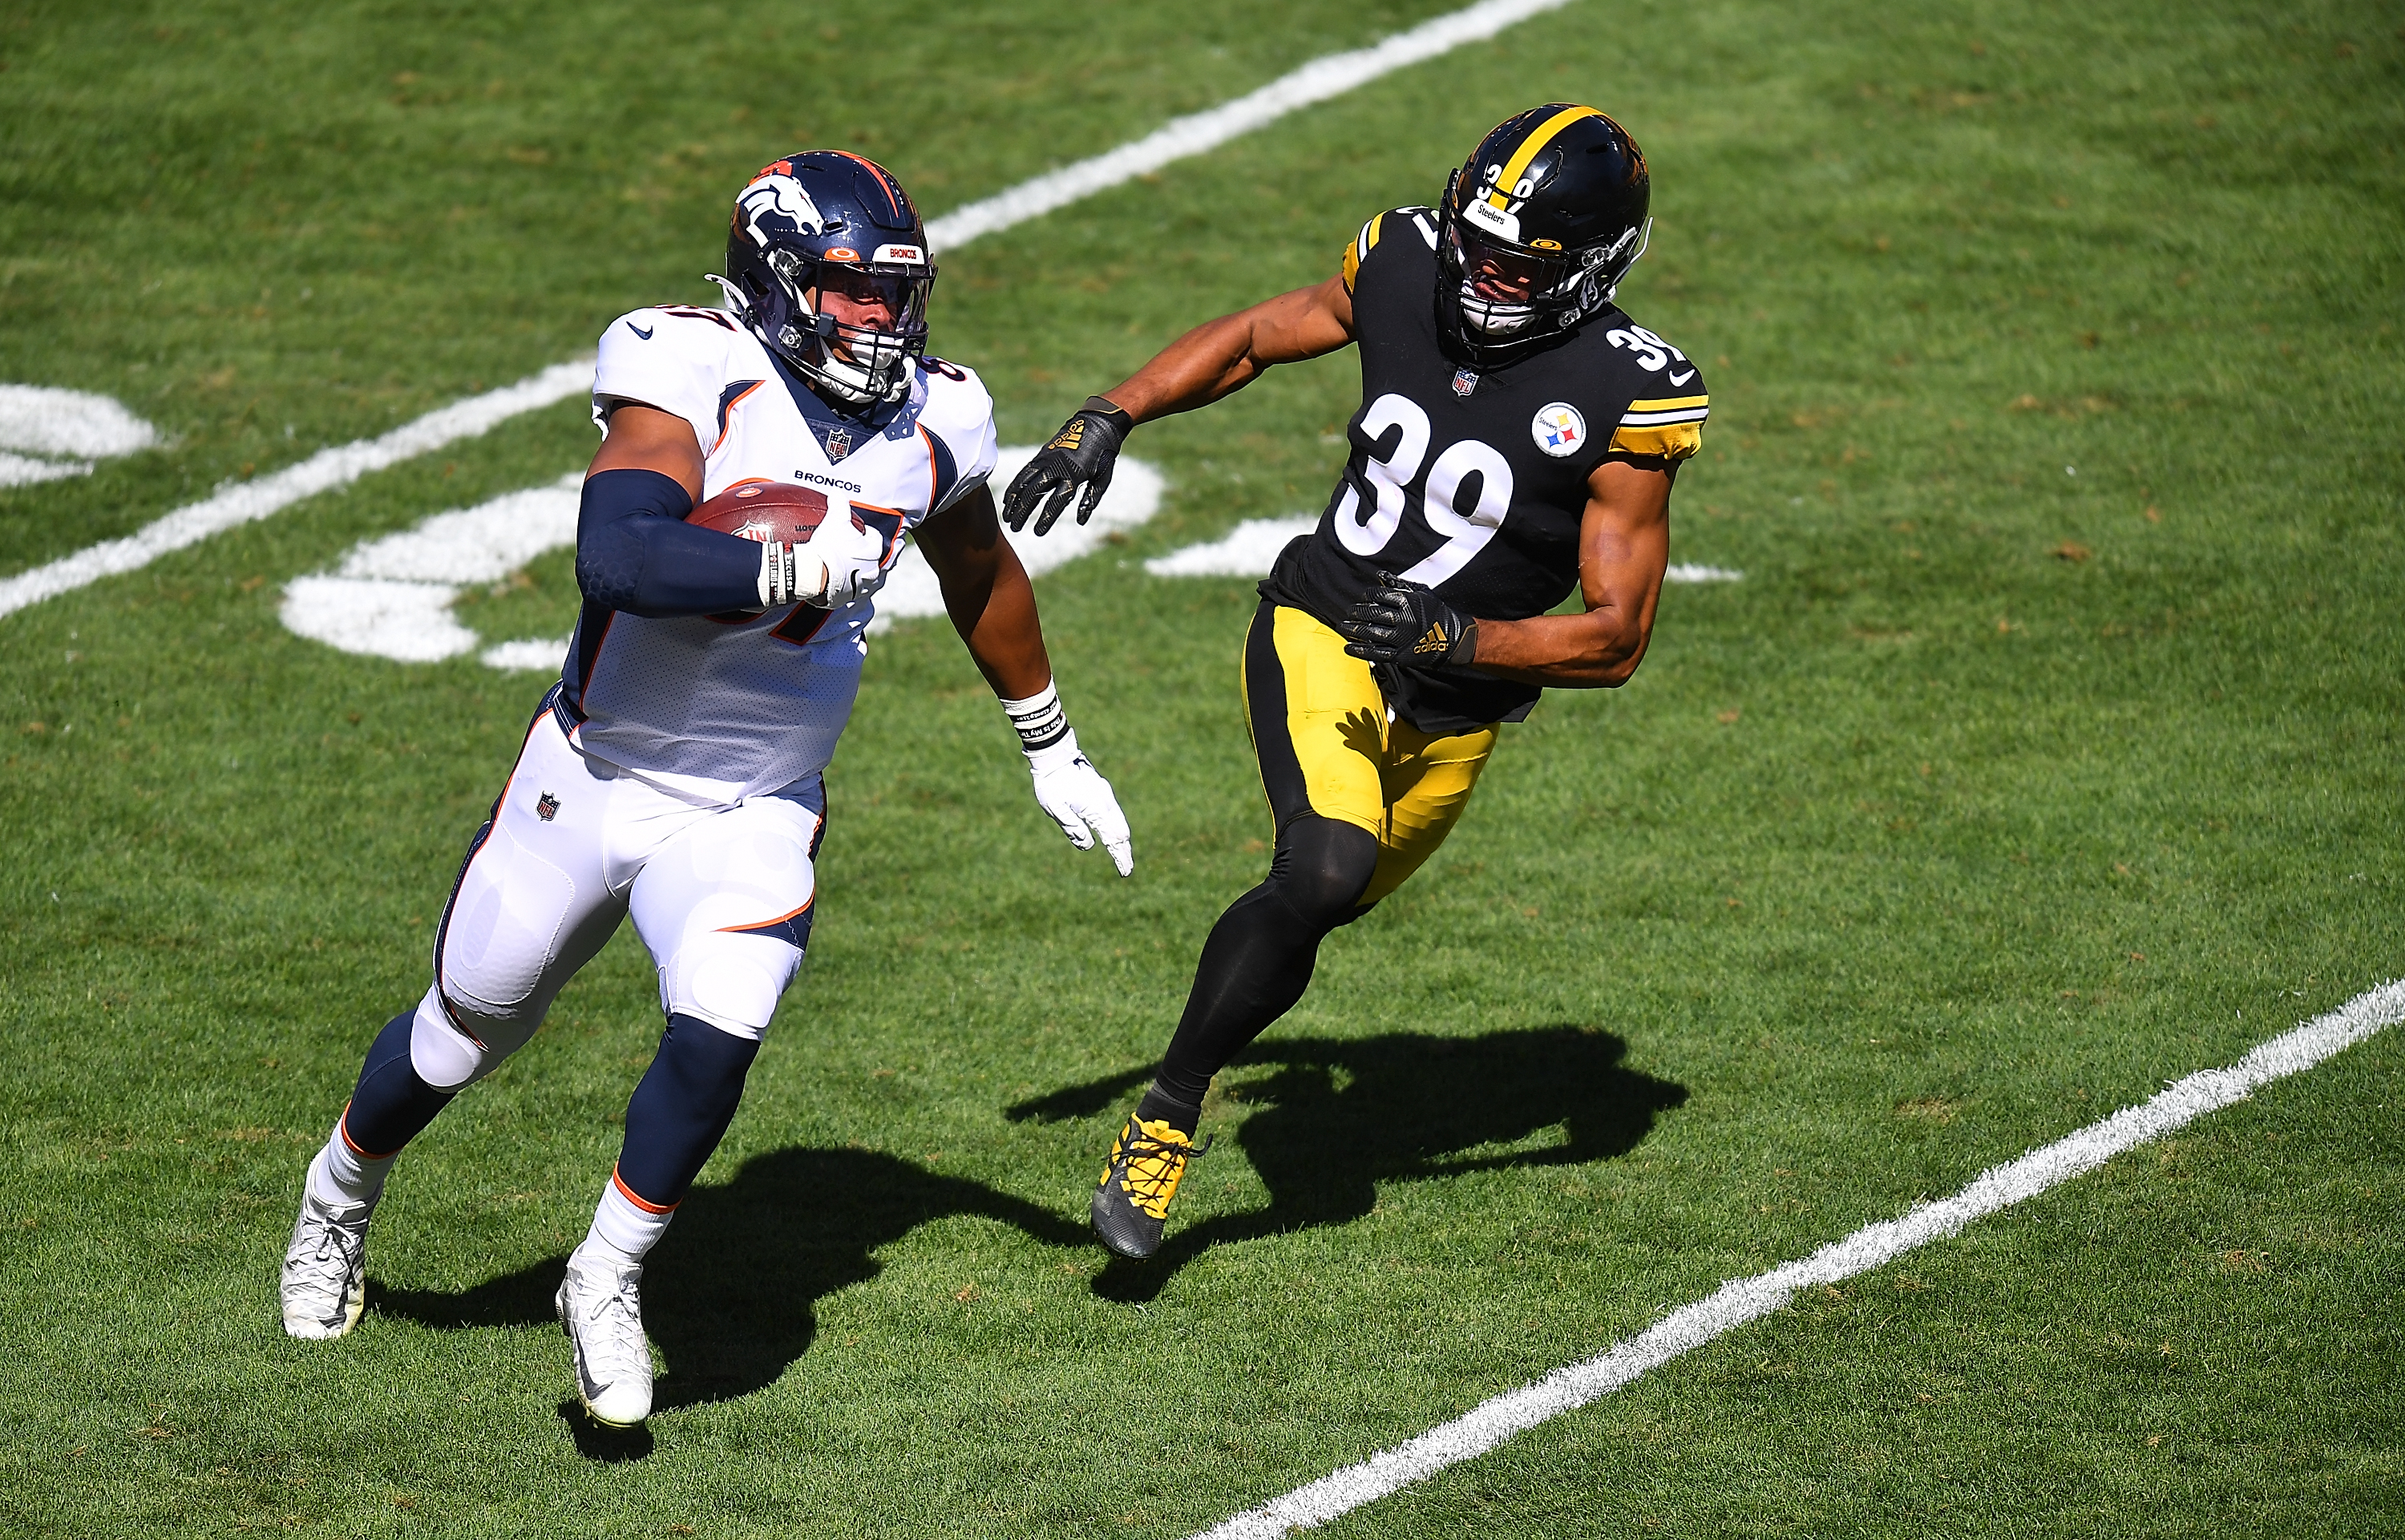 Noah Fant of the Denver Broncos carries the ball in front of Minkah Fitzpatrick of the Pittsburgh Steelers at Heinz Field on Sept. 20, 2020.